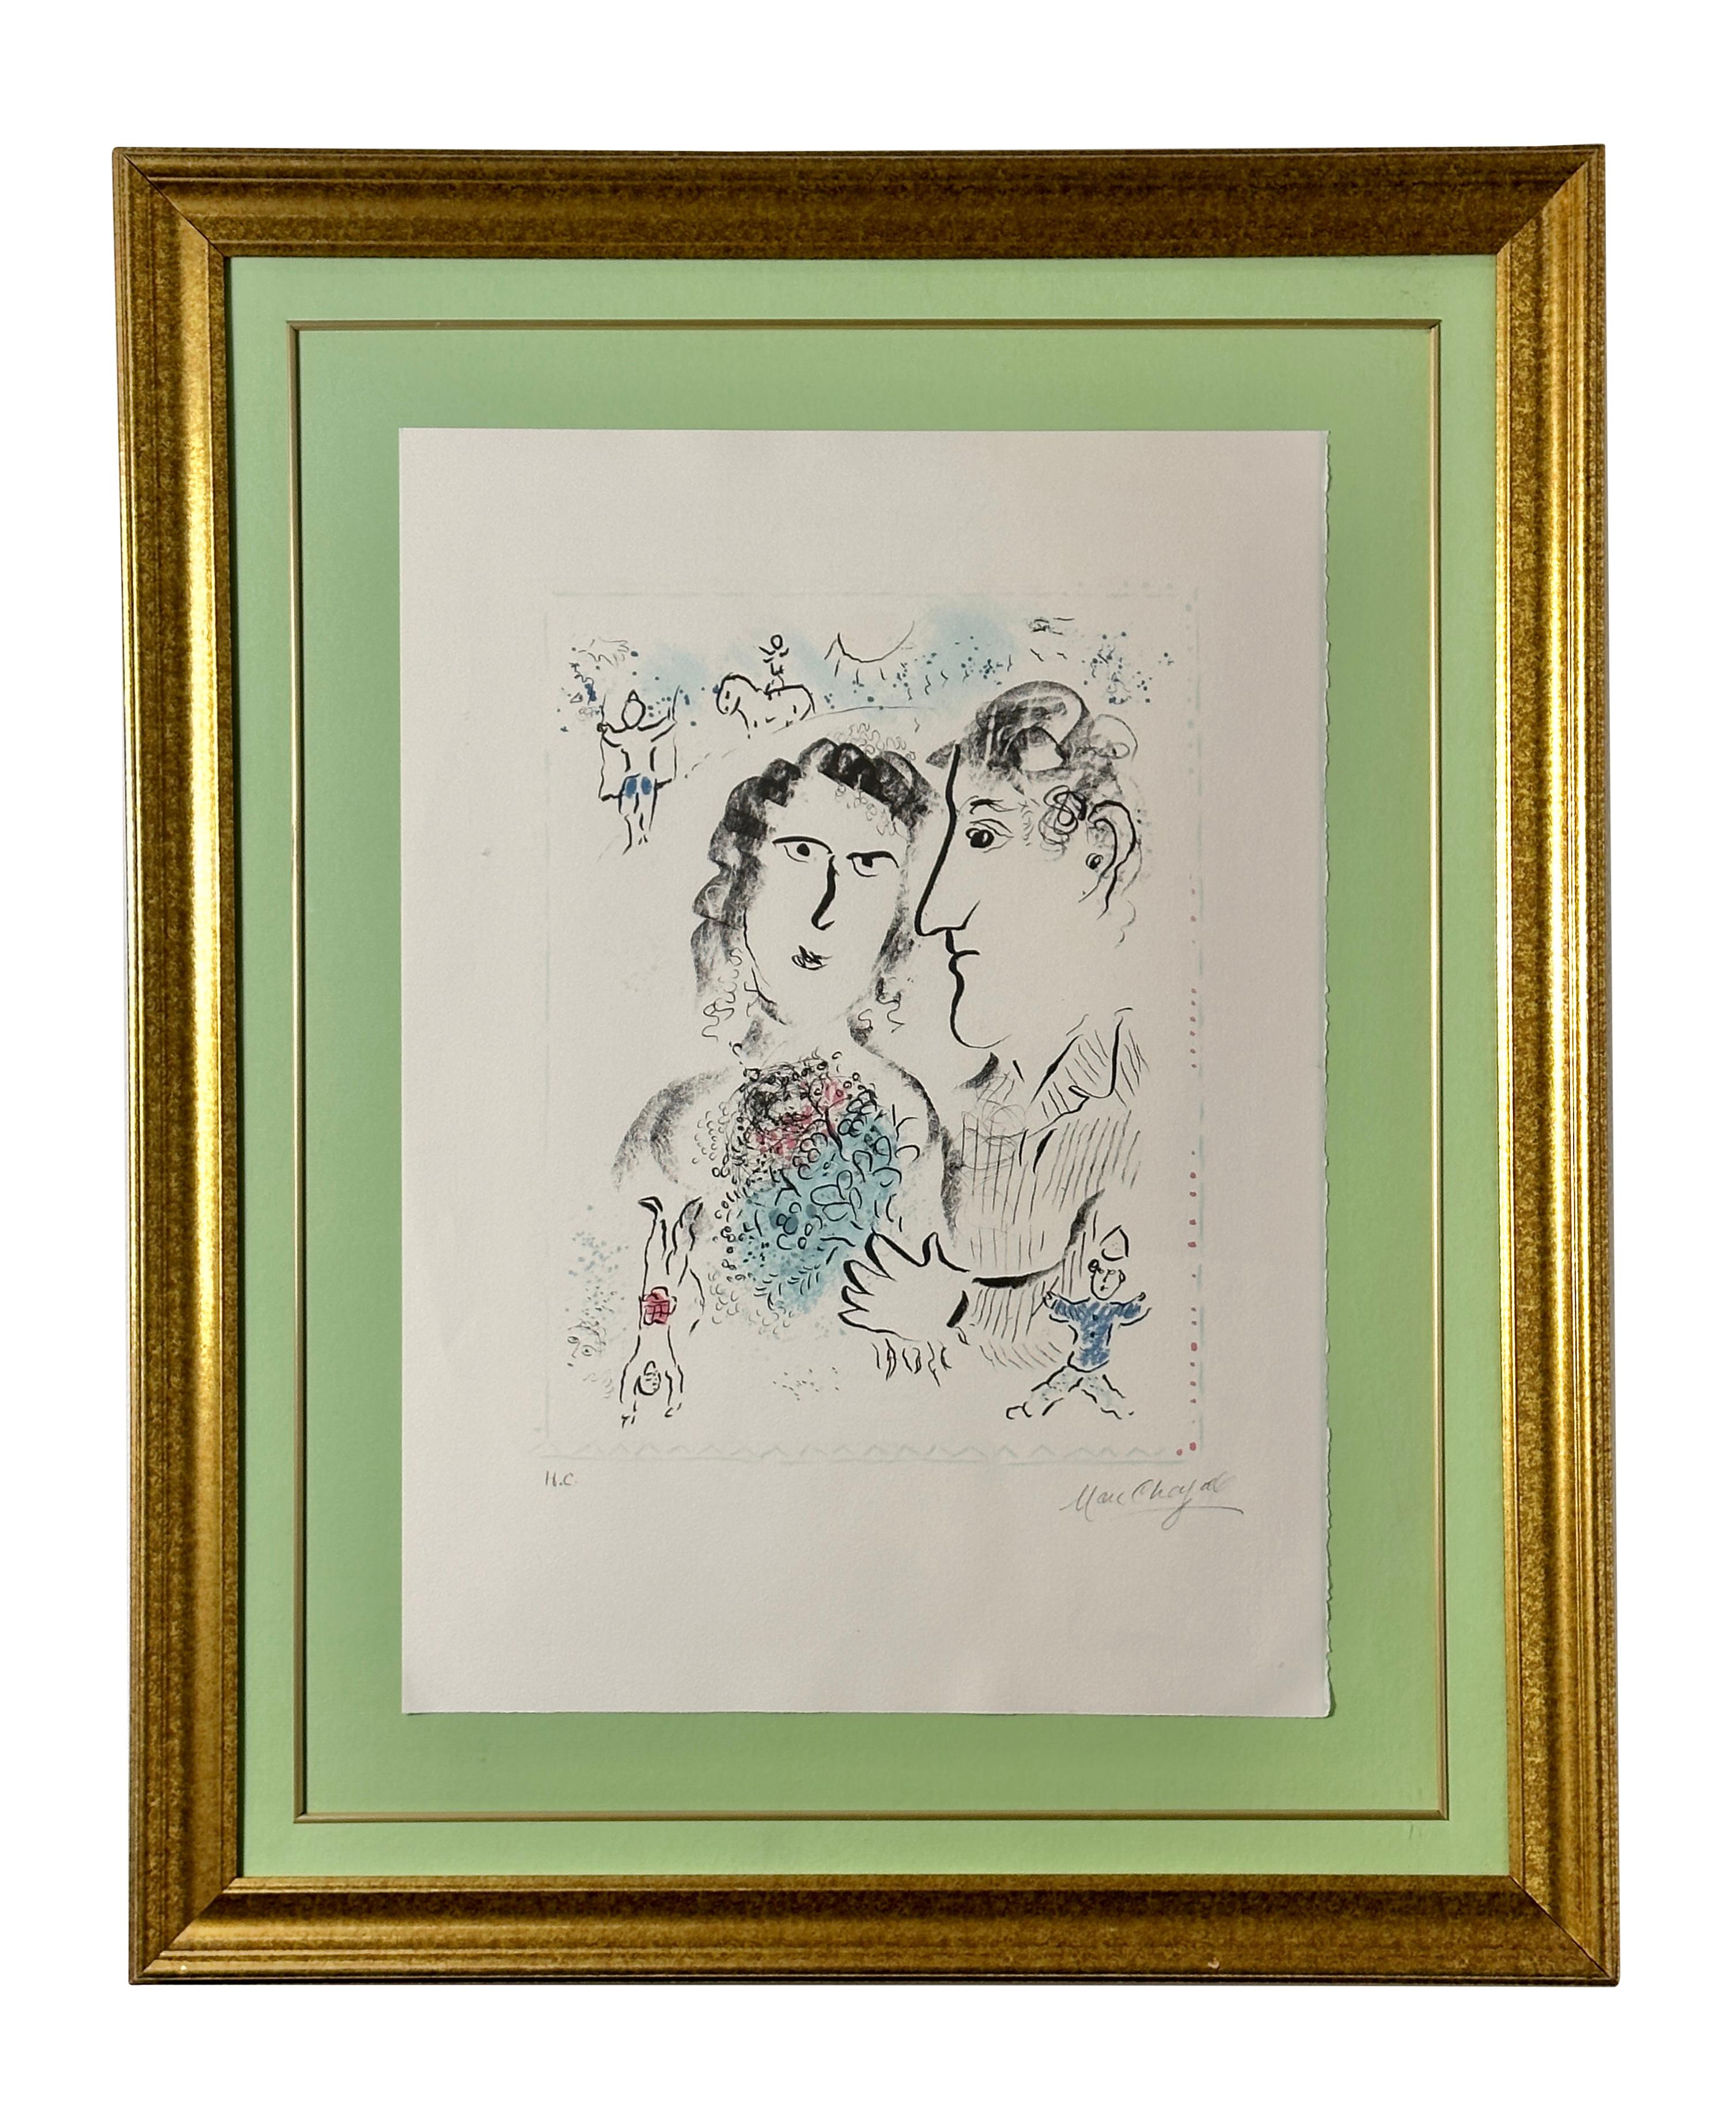 Marc Chagall hand signed Lithograph Artist Proof Engagement at The Circus 1983 
Chagall Fiançailles au cirque (Engagement at the Circus), 1983 is a playful and amorous depiction of human adoration. Rendering a blend of fantasy and spirituality,